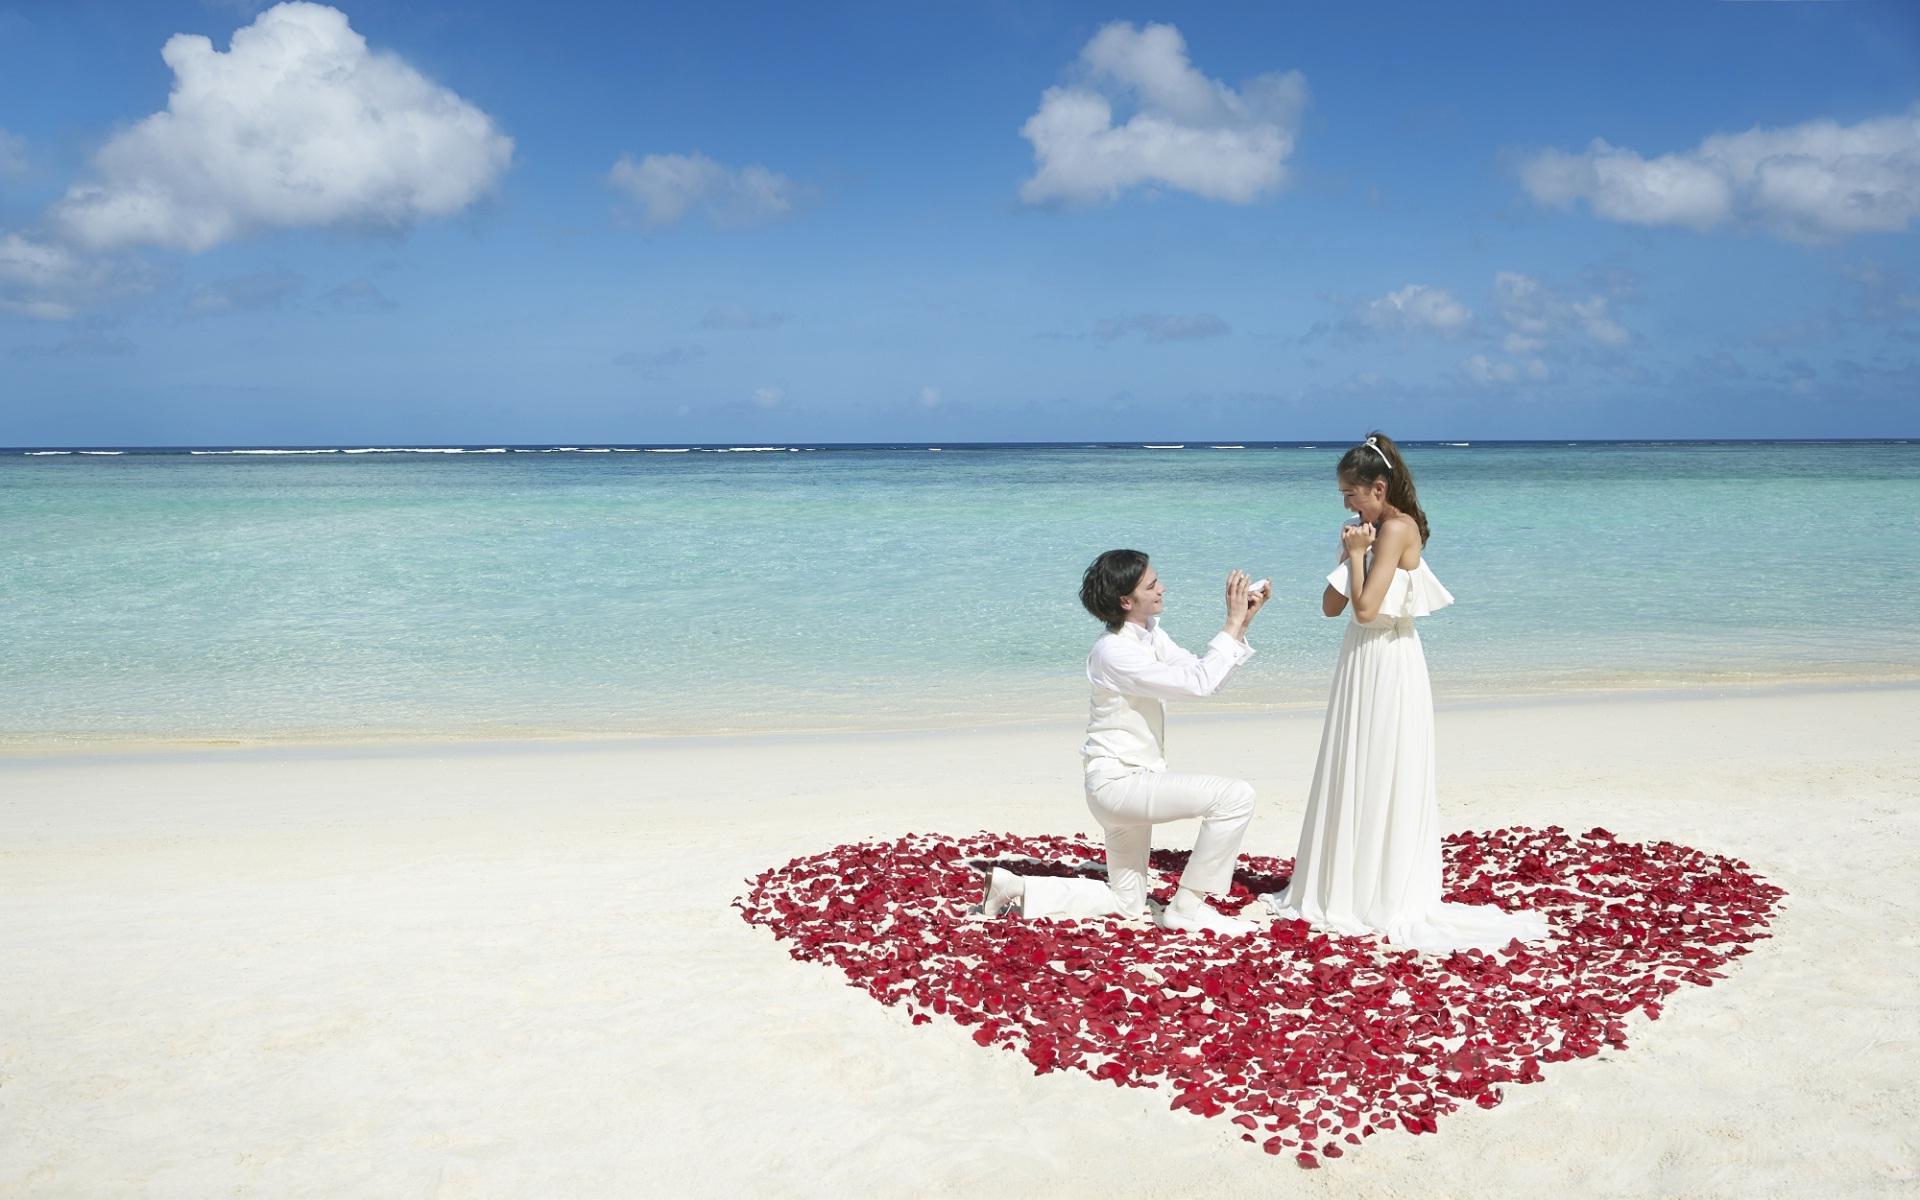 Best Happy Propose Day Wallpapers 3896 : Wallpapers13.com